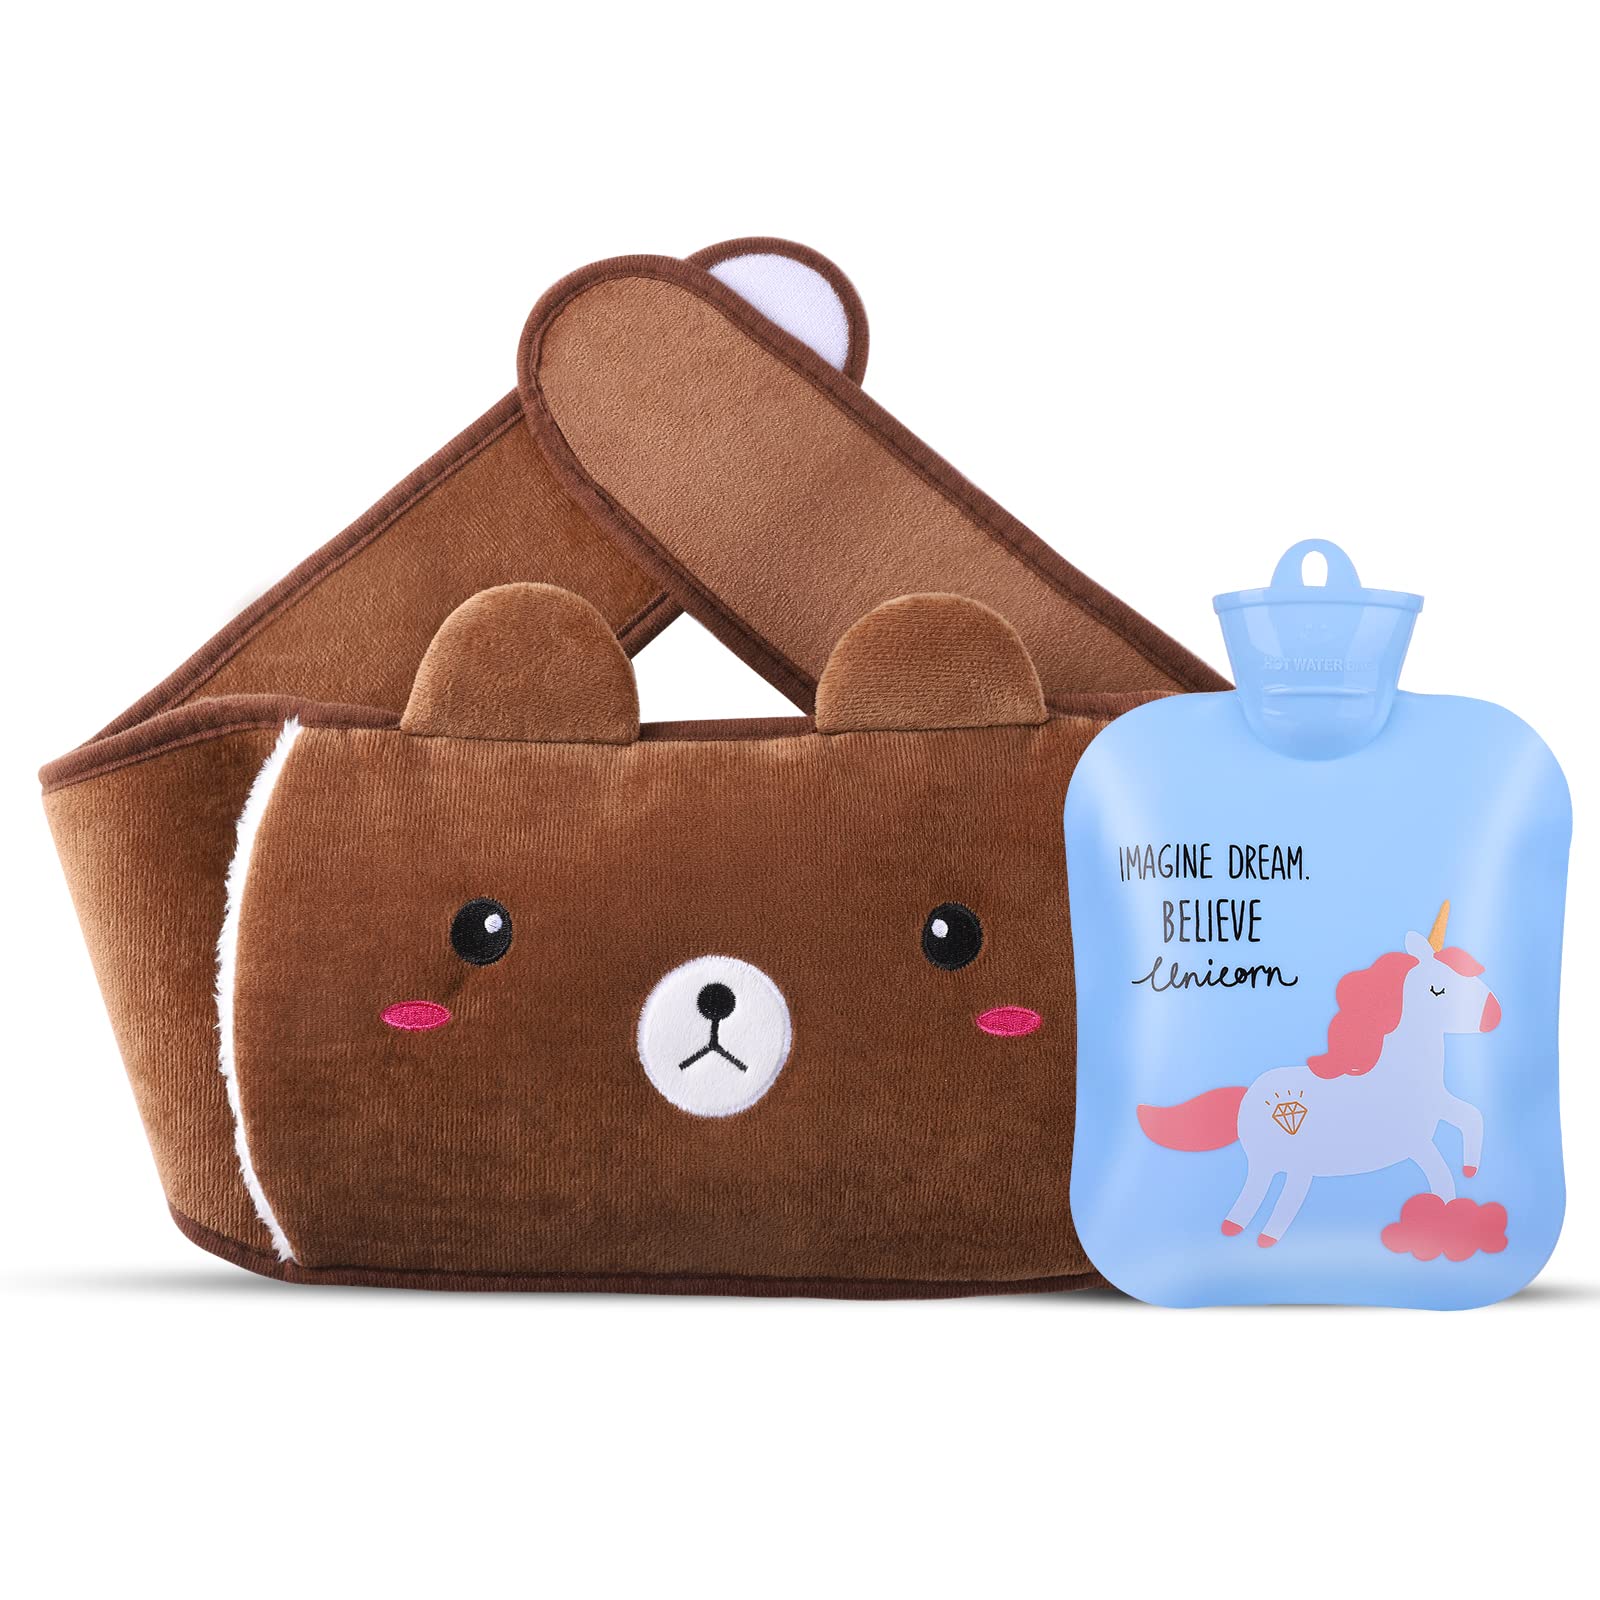 Hot Water Bottle, Warm Water Bag Rubber Hot Water Pouch with Soft Plush Hand Waist Warmer Cover